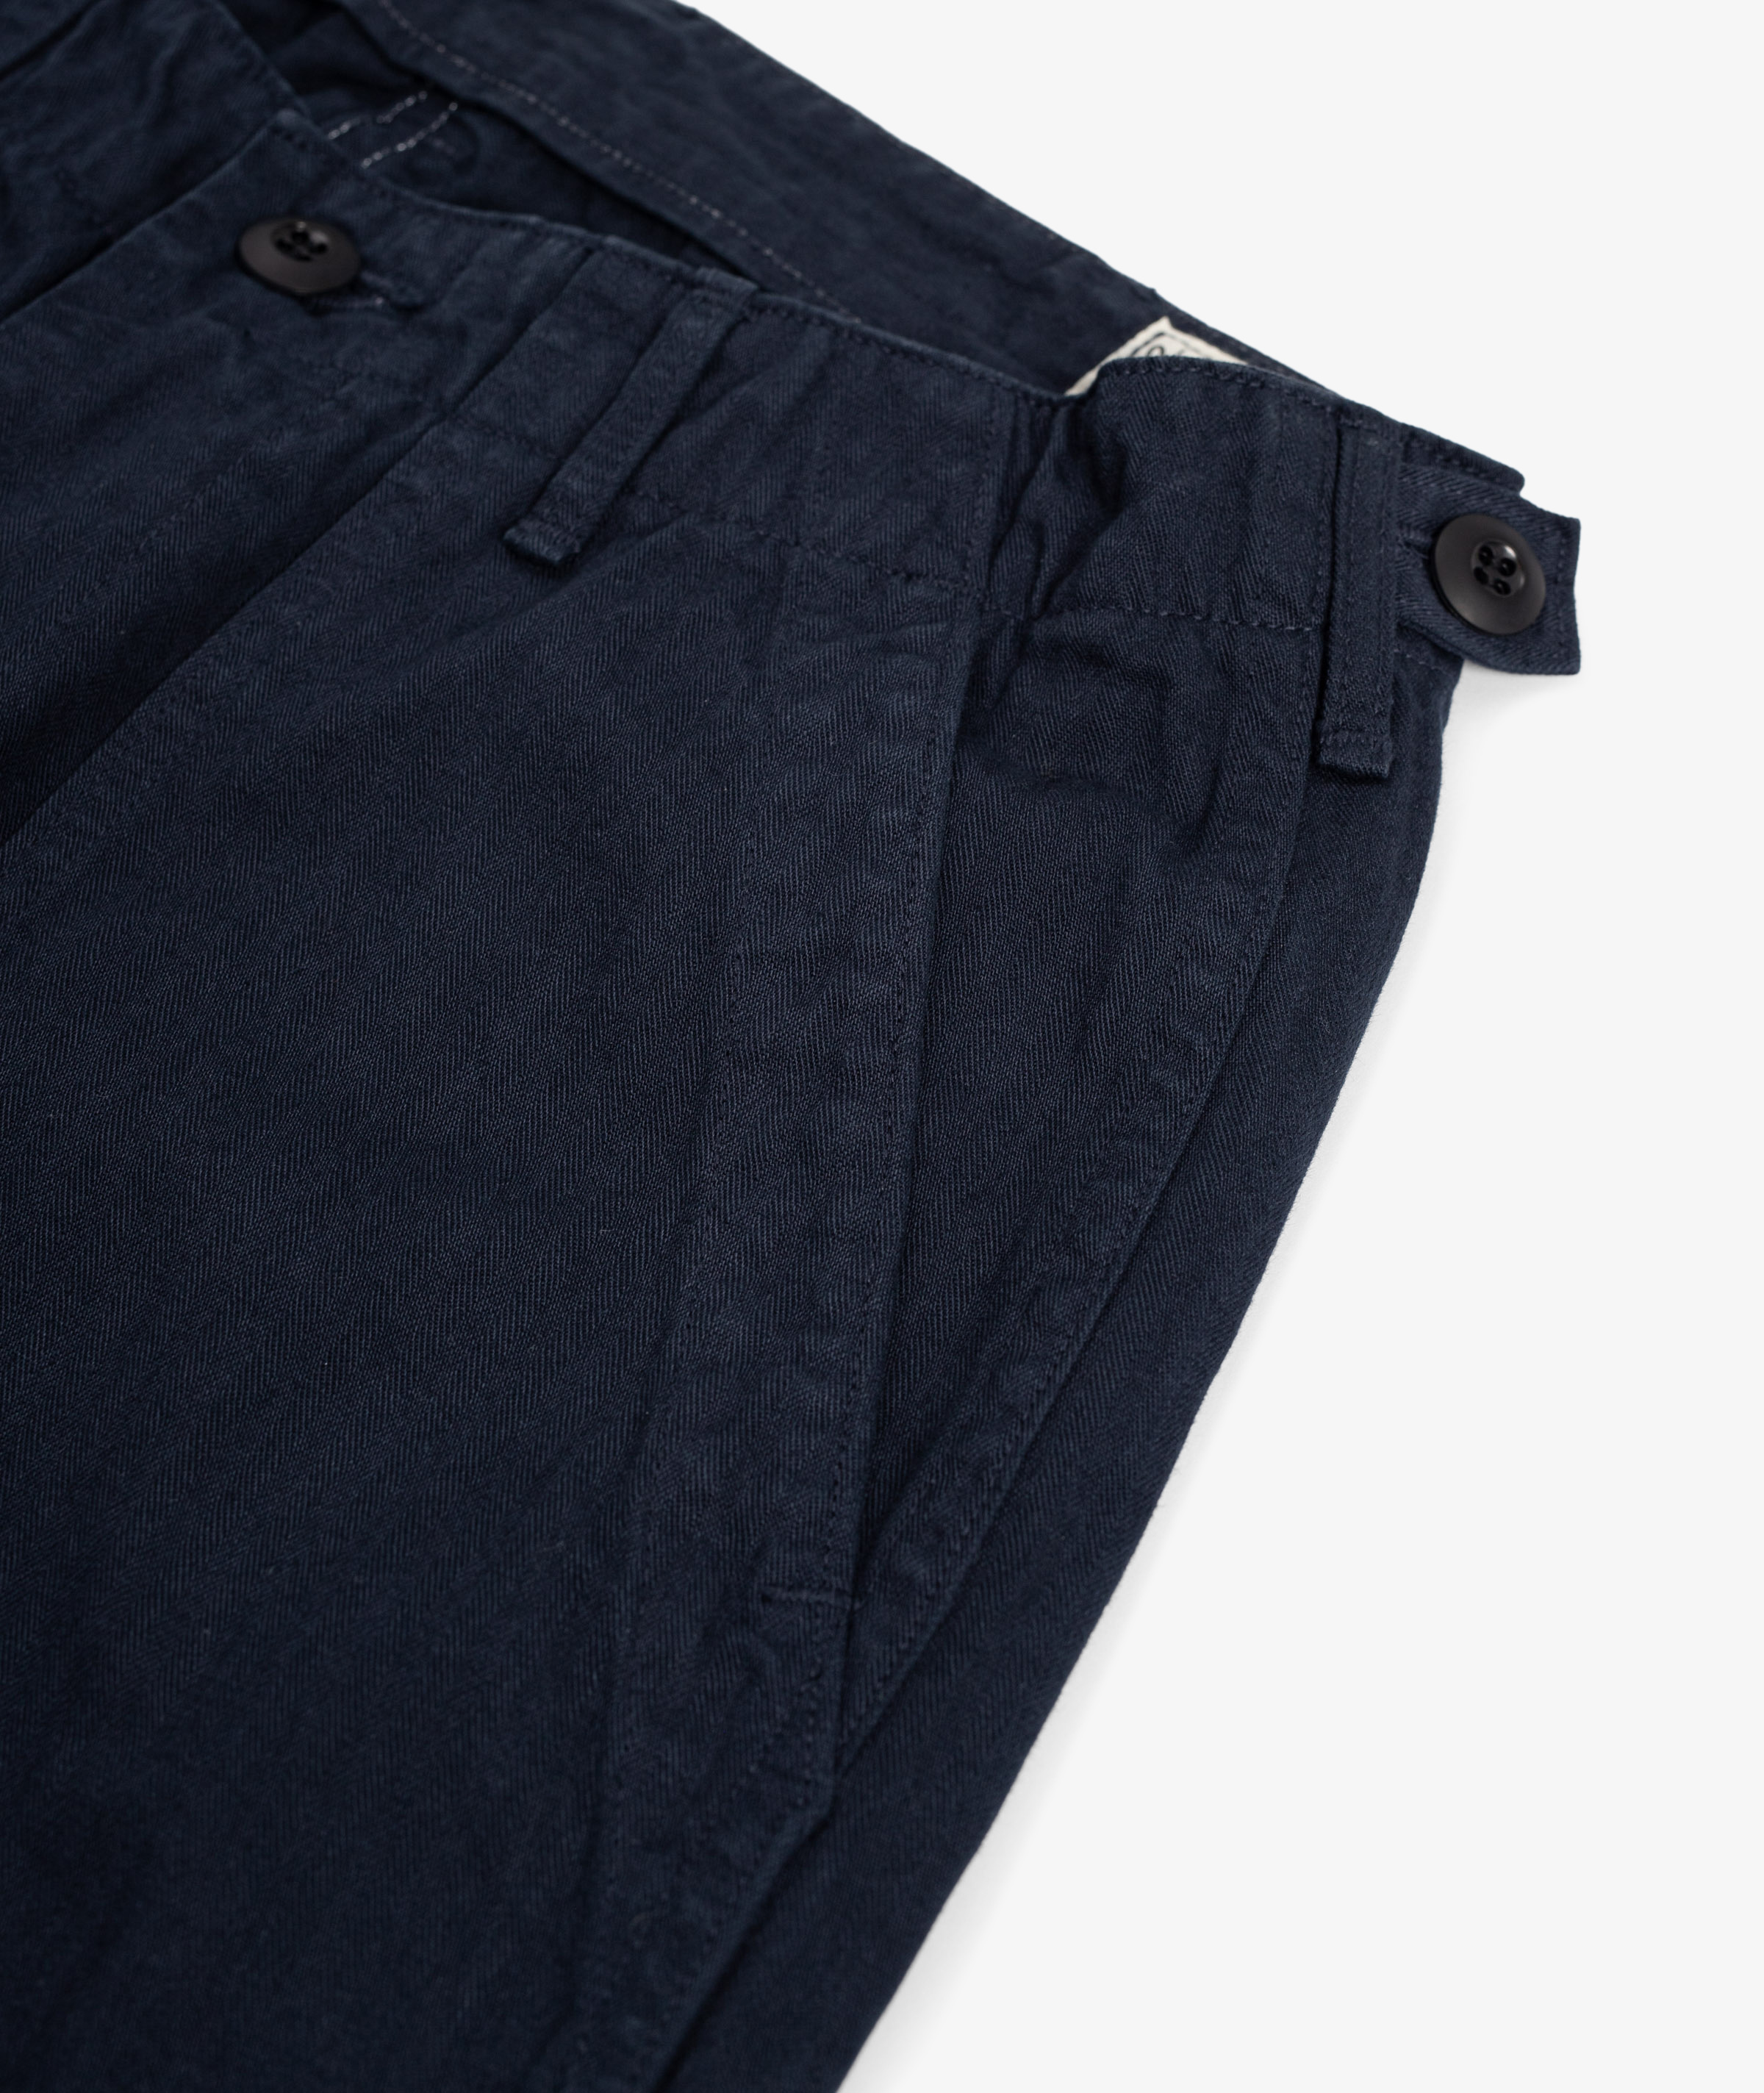 Norse Store | Shipping Worldwide - orSlow Slim Fit Fatigue Pant - Dark Navy